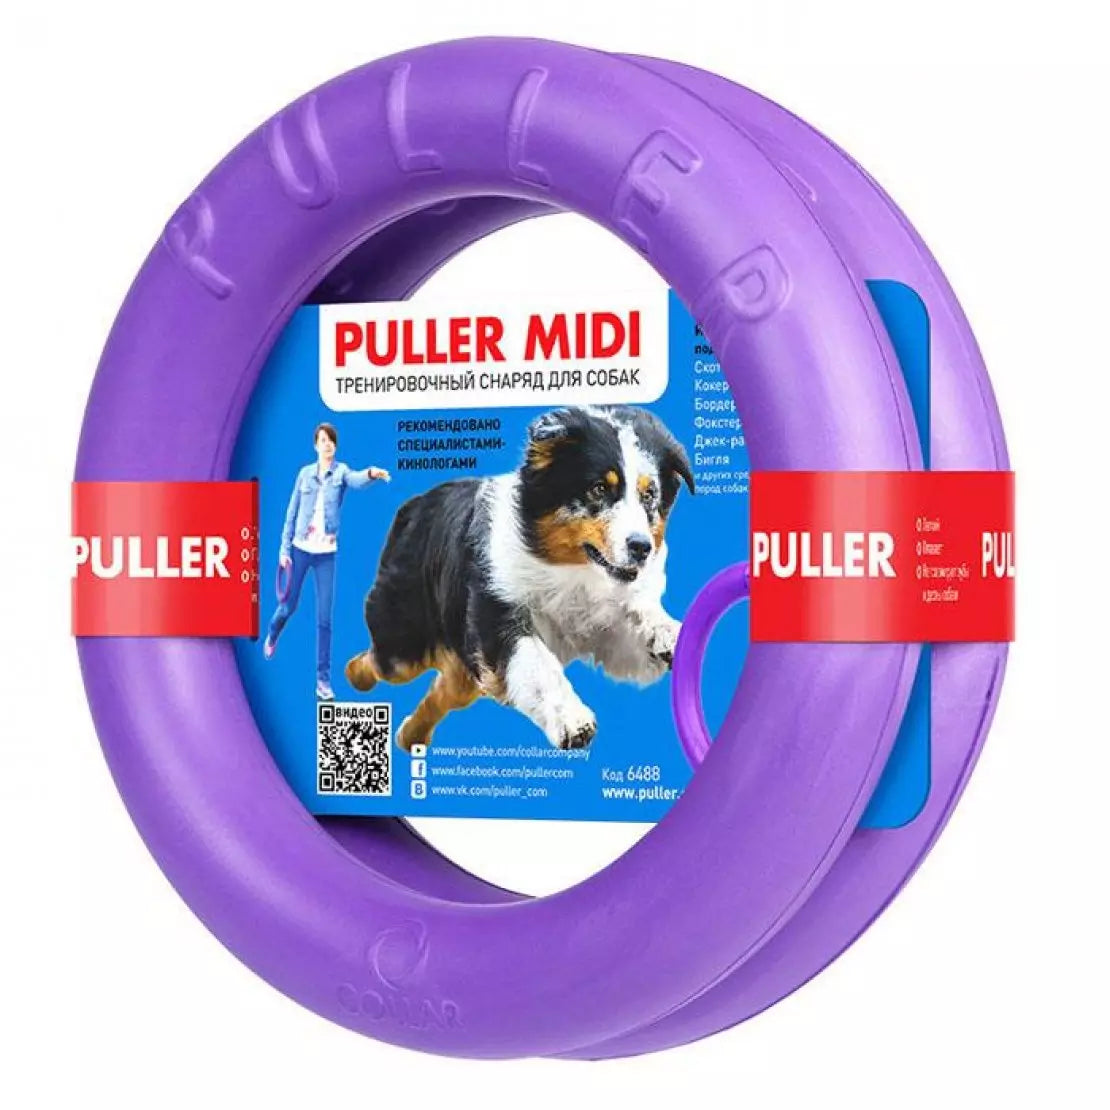 Puller Dog Fitness Chew Tool